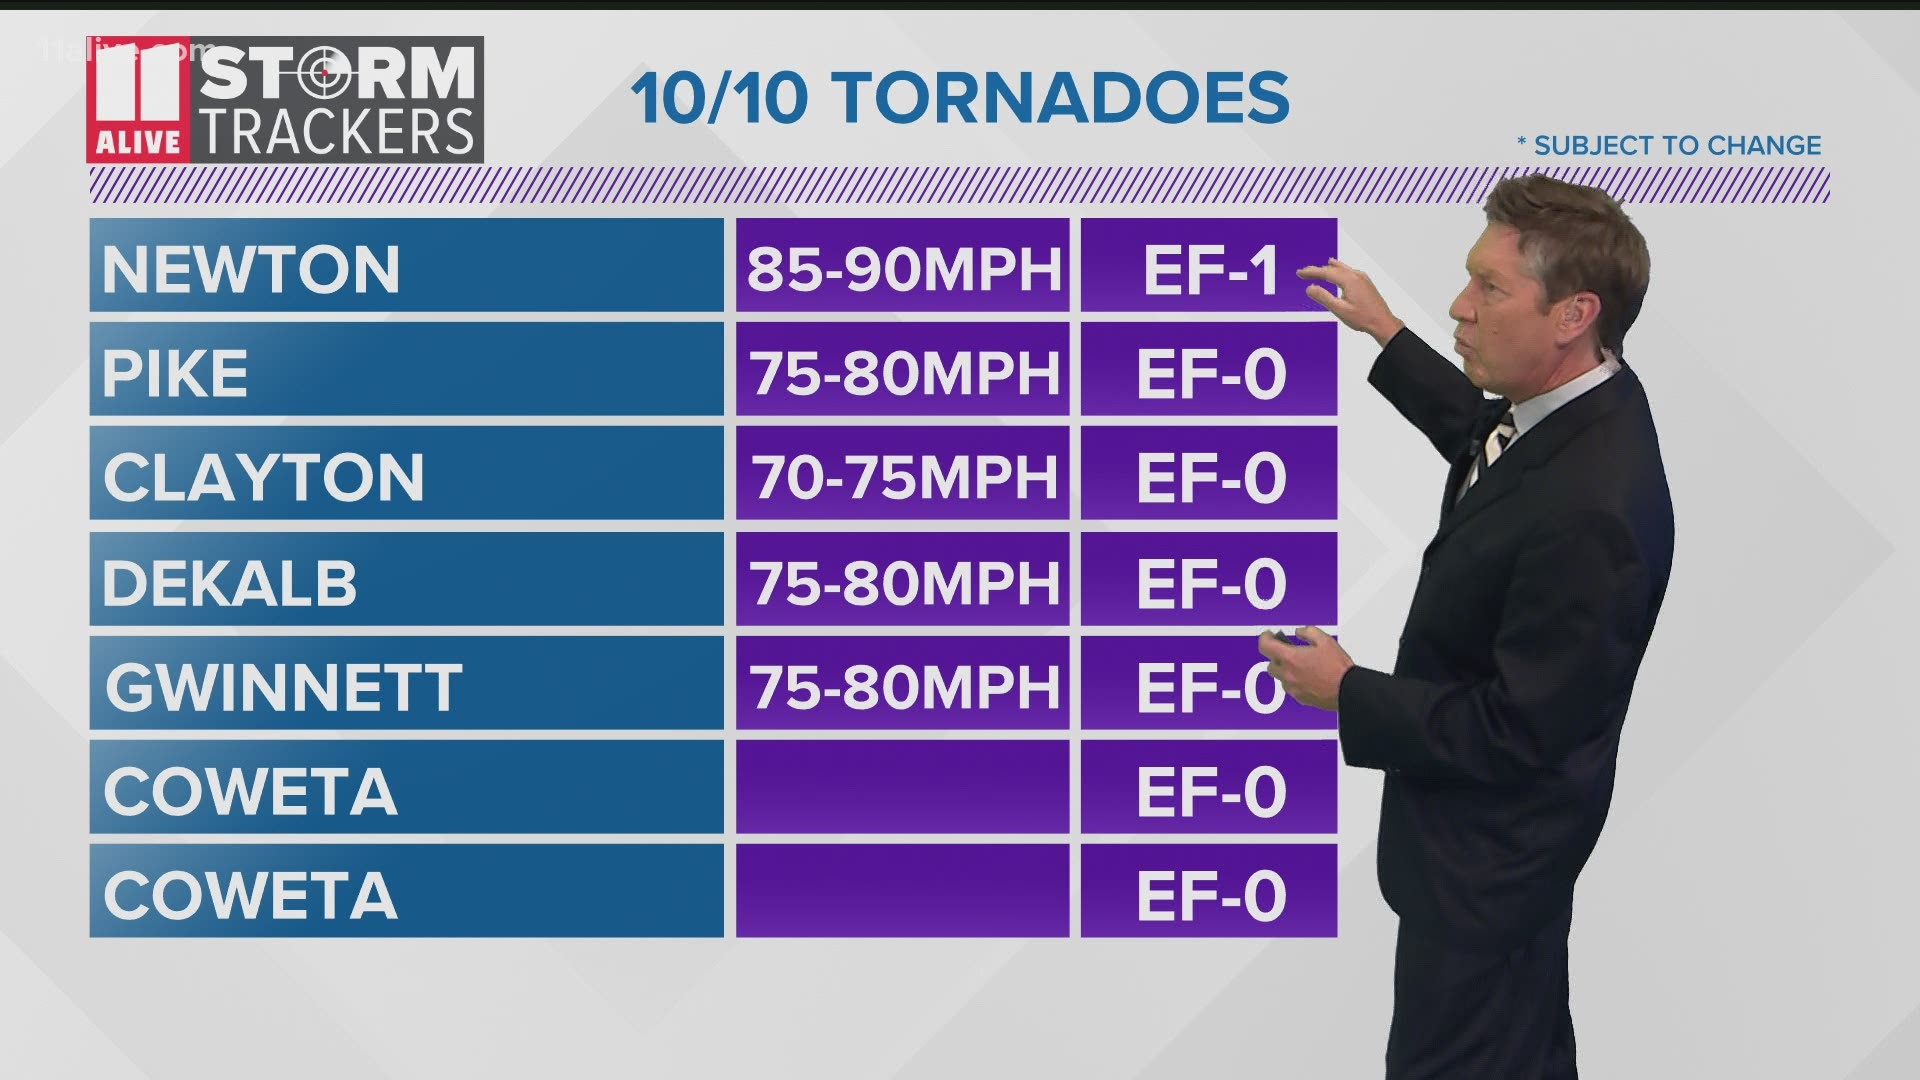 Surveys from the National Weather Service confirmed additional tornadoes.